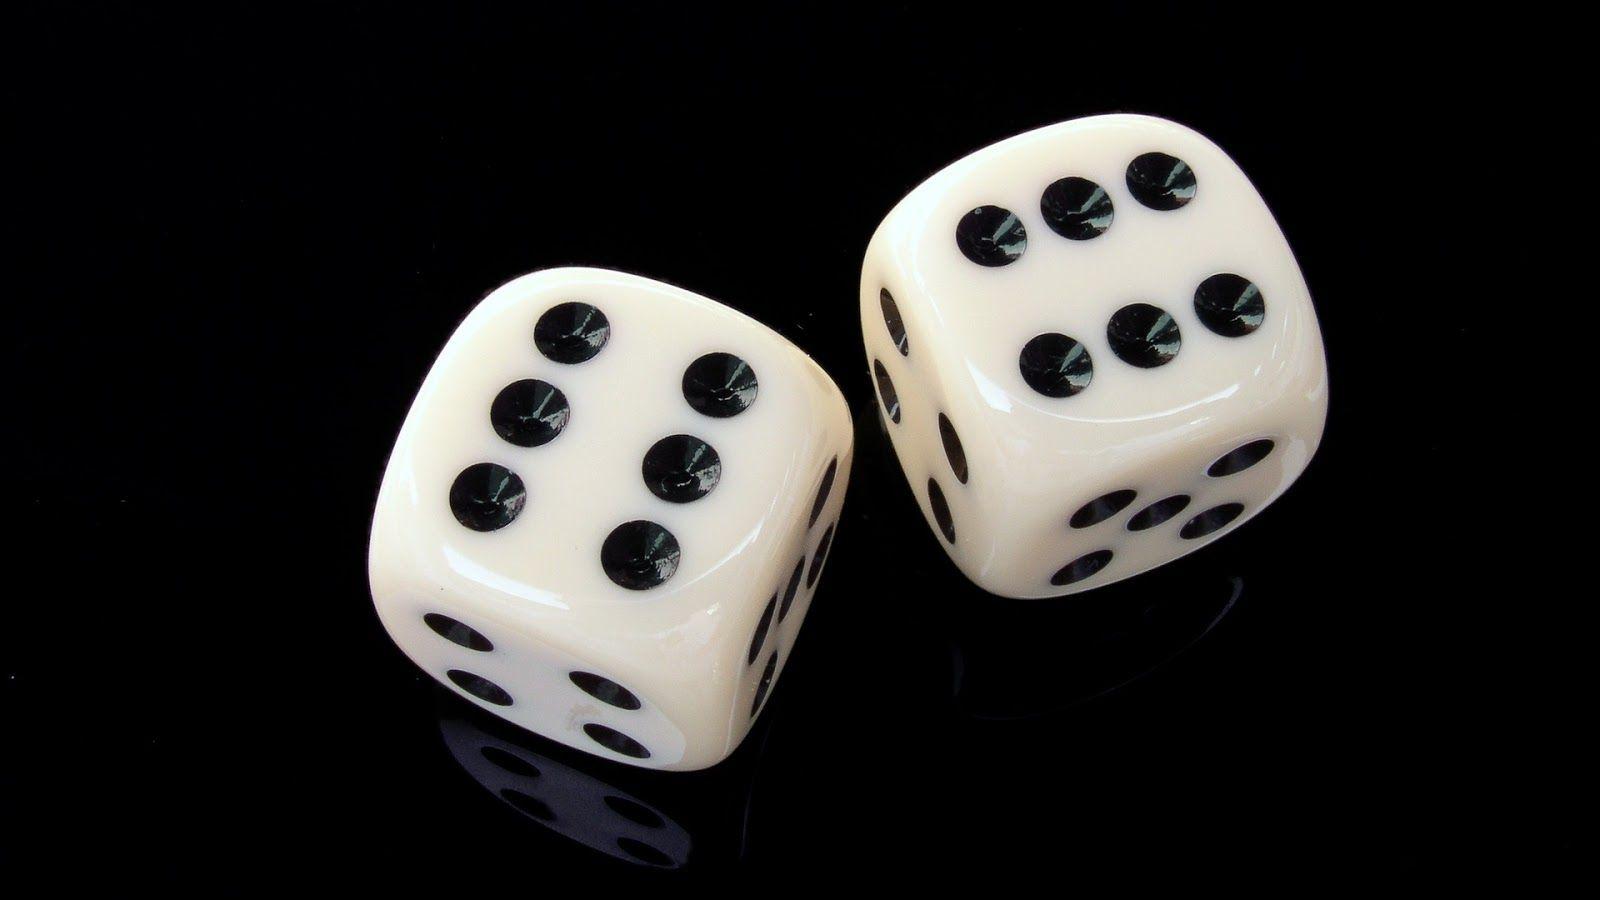 Lucky Dice Live Wallpaper - free download